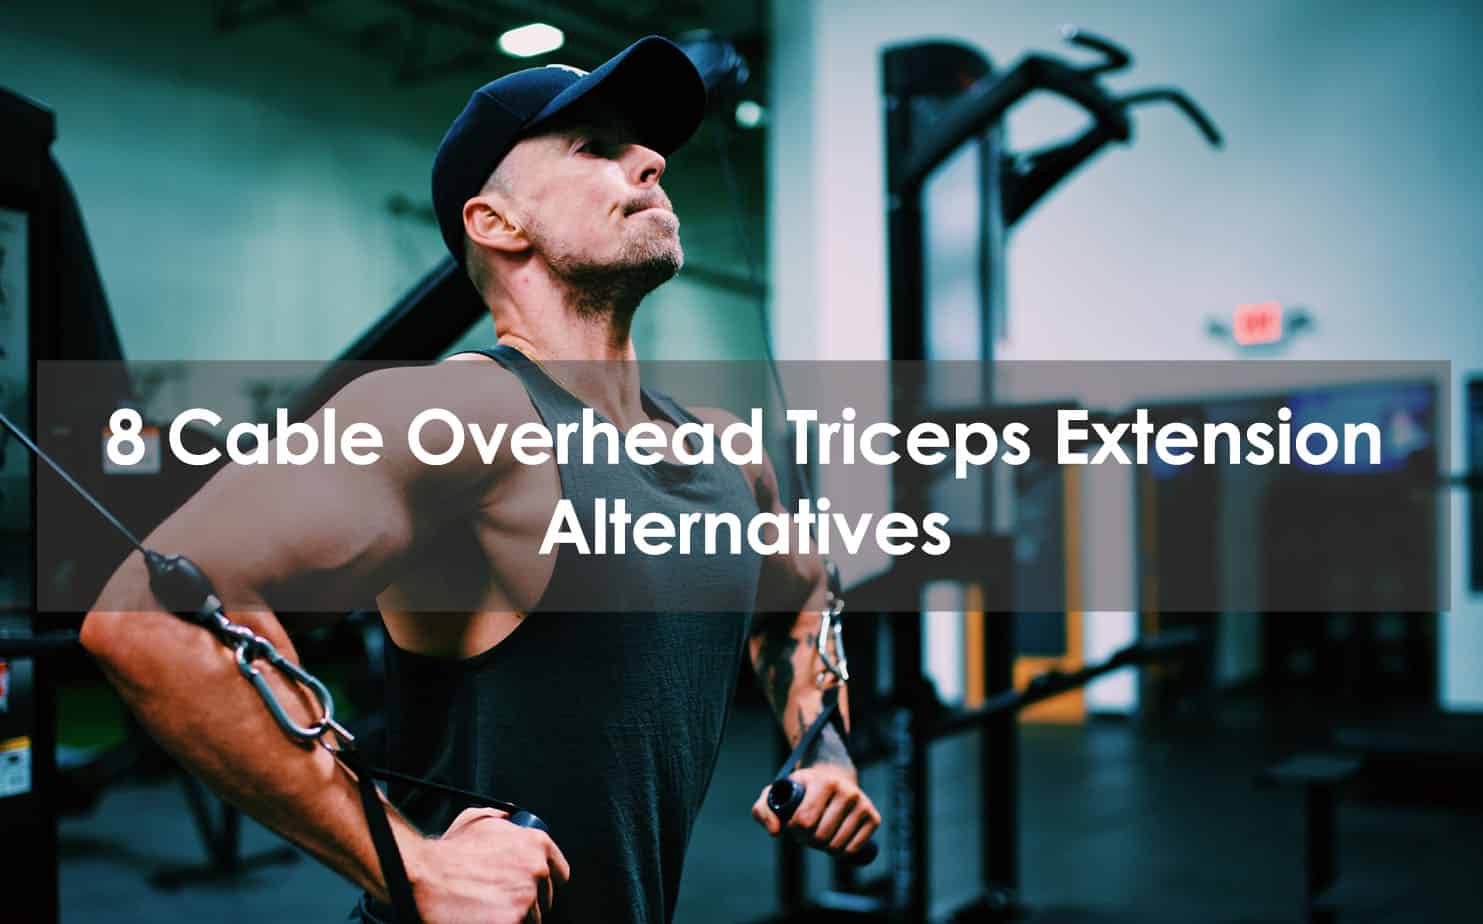 https://www.gym-pact.com/wp-content/uploads/2021/12/cable-overhead-triceps-extension-alternative.jpg